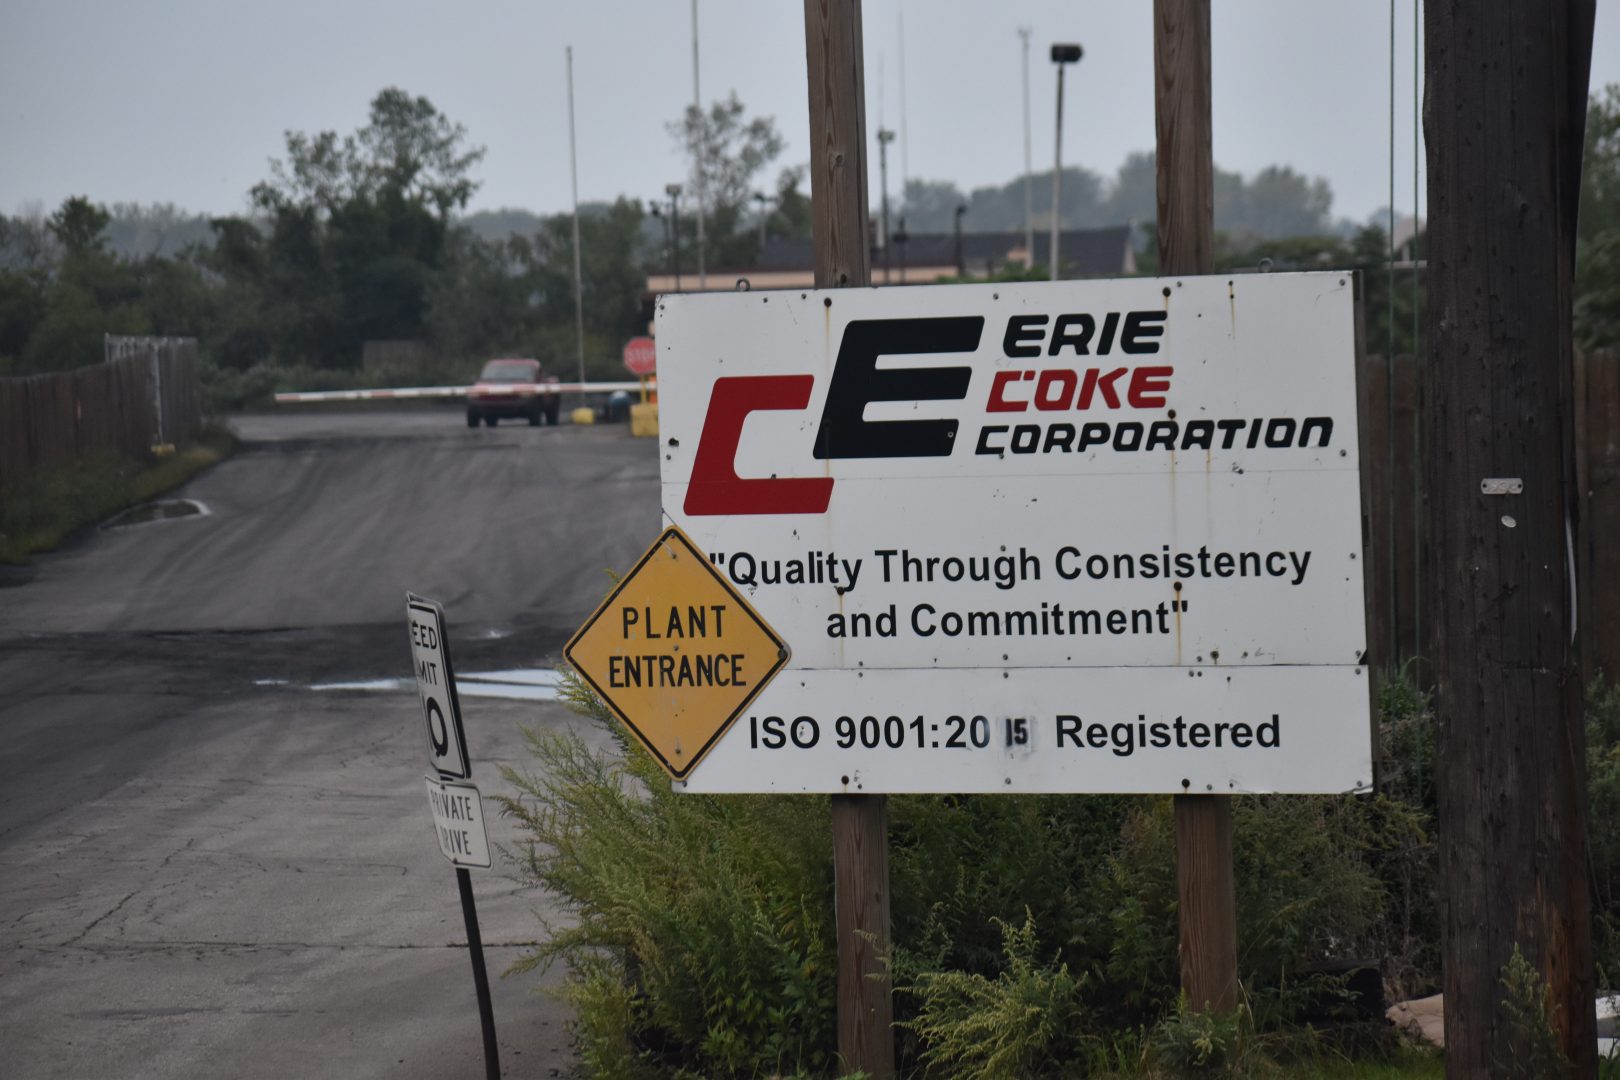 A sign for the entrance of Erie Coke.